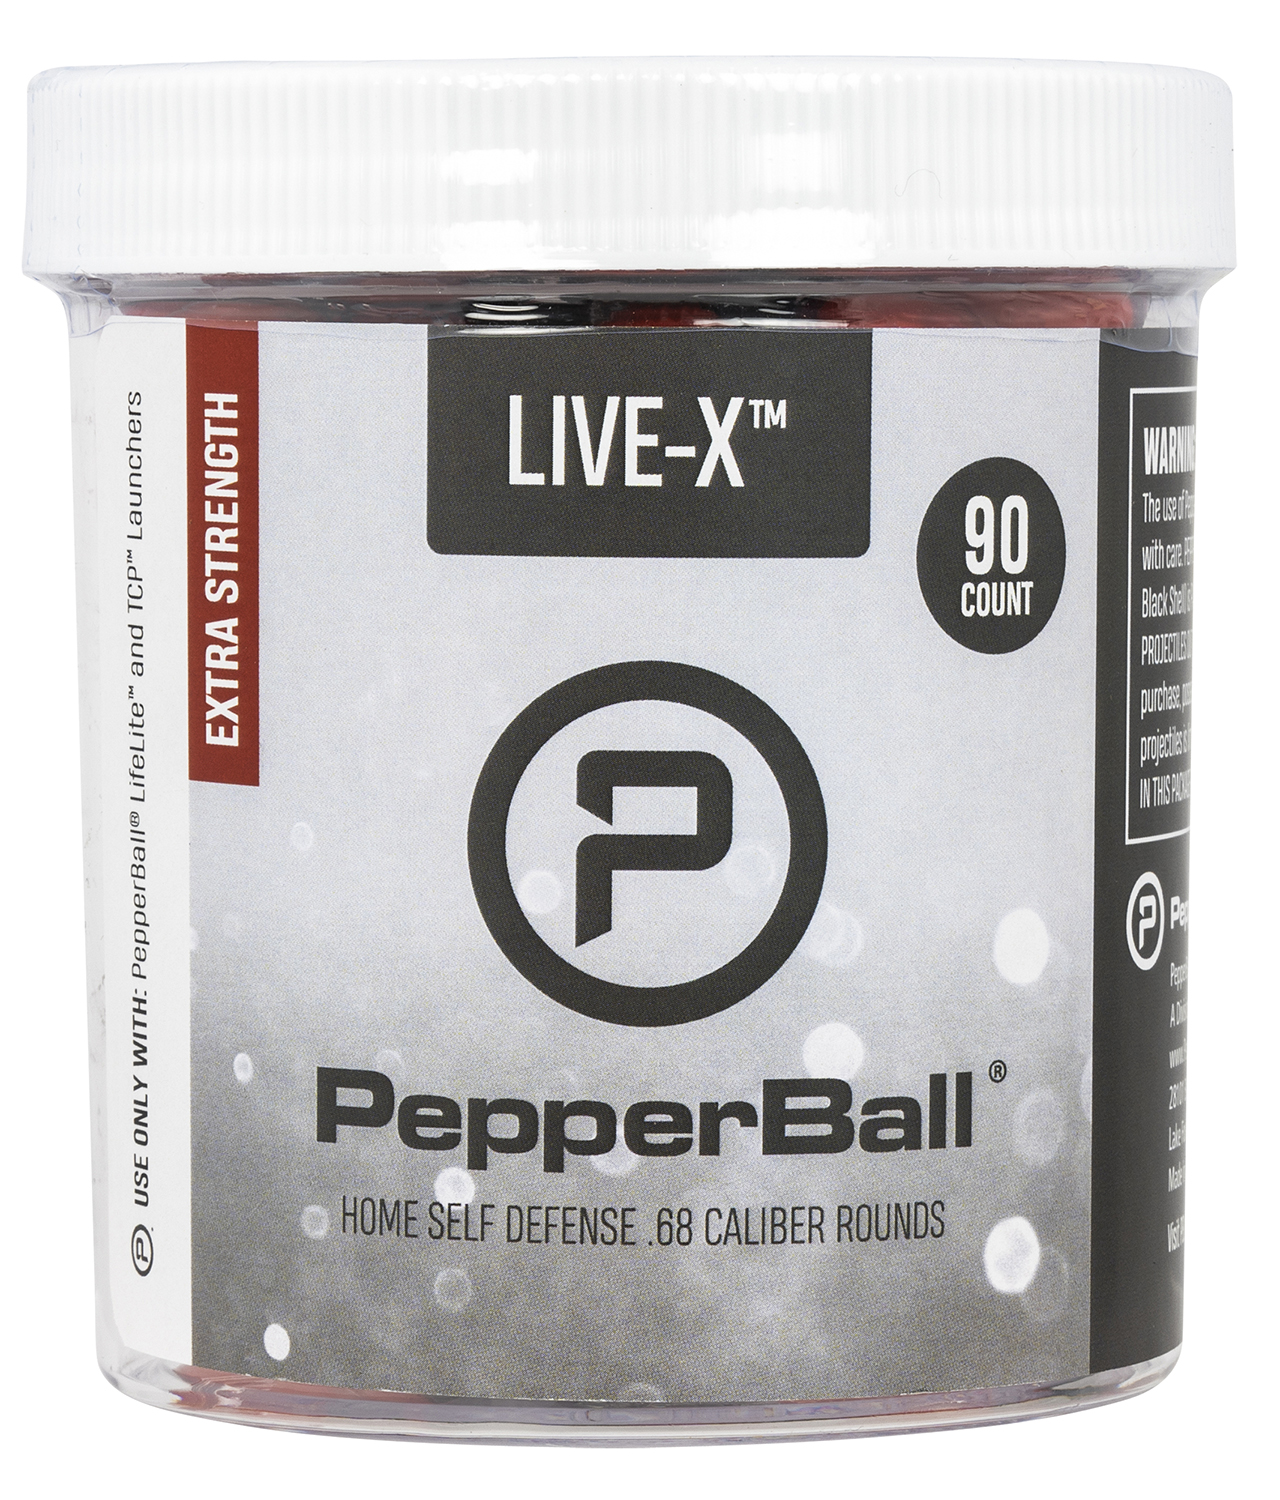 PEPPERBALL LIVE-X .68CAL PROJECTILE 90 PACK